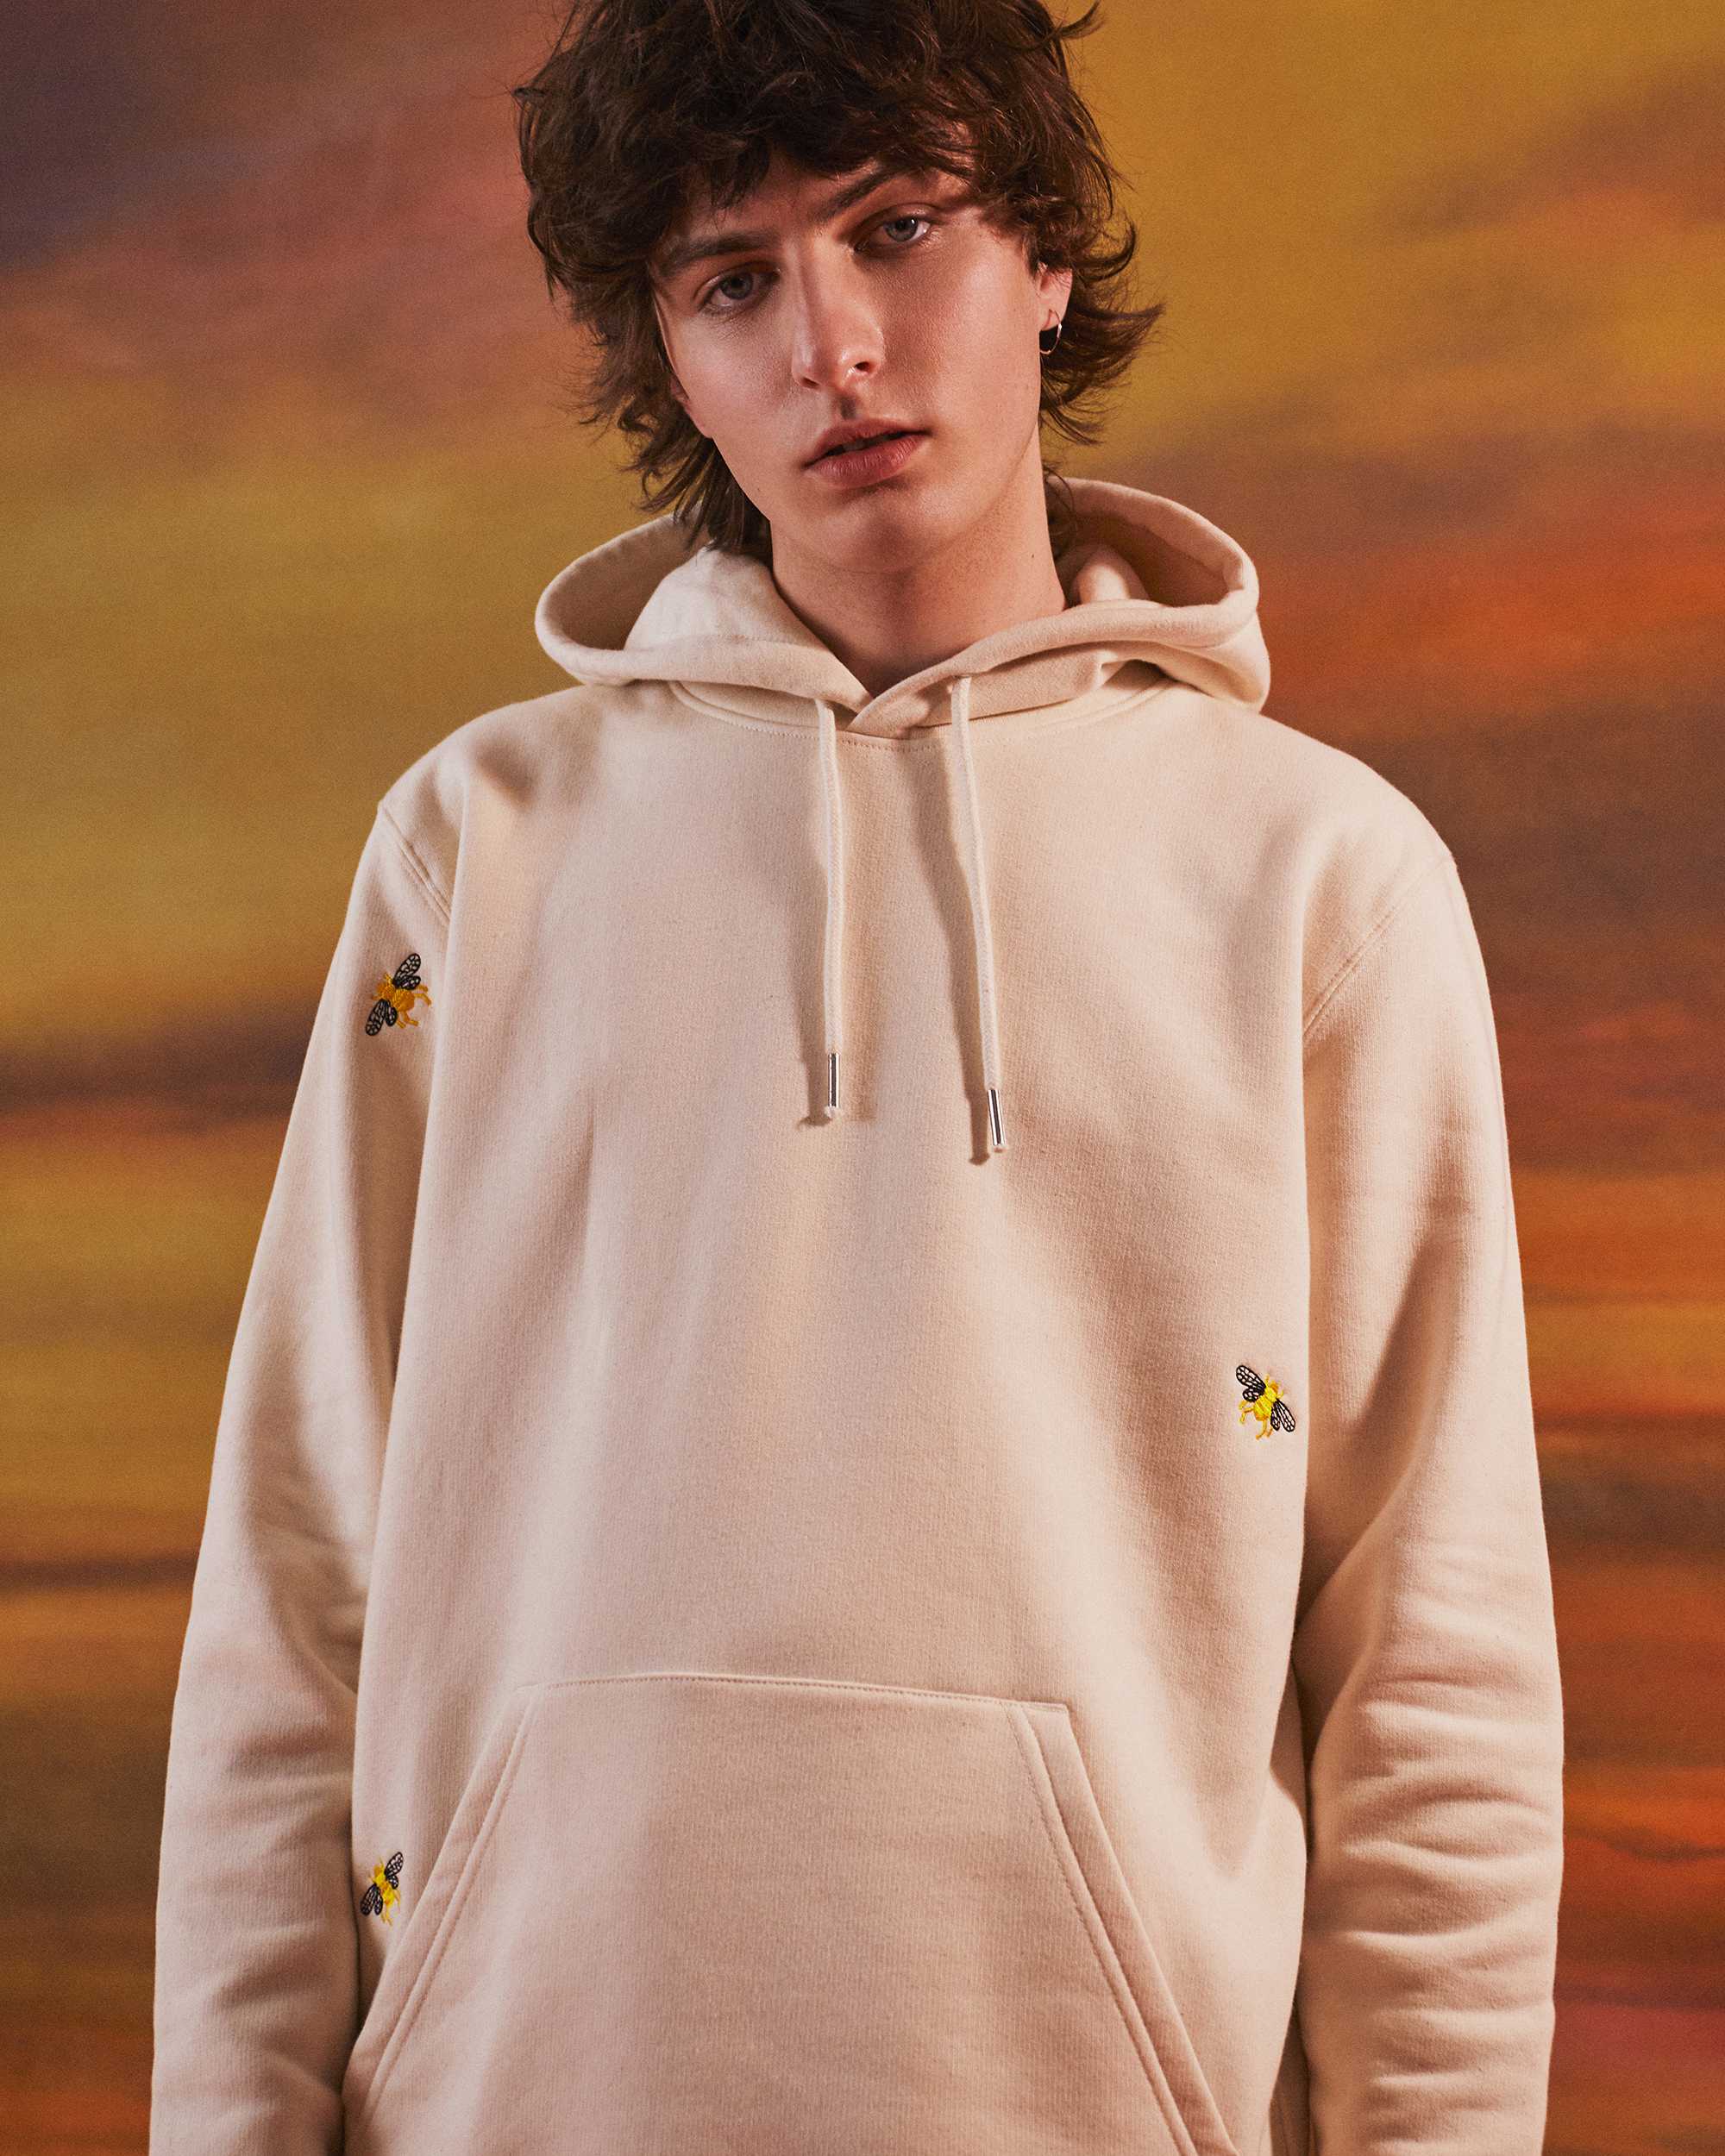 A guys wearing a cream hoodie with bees embroidered 